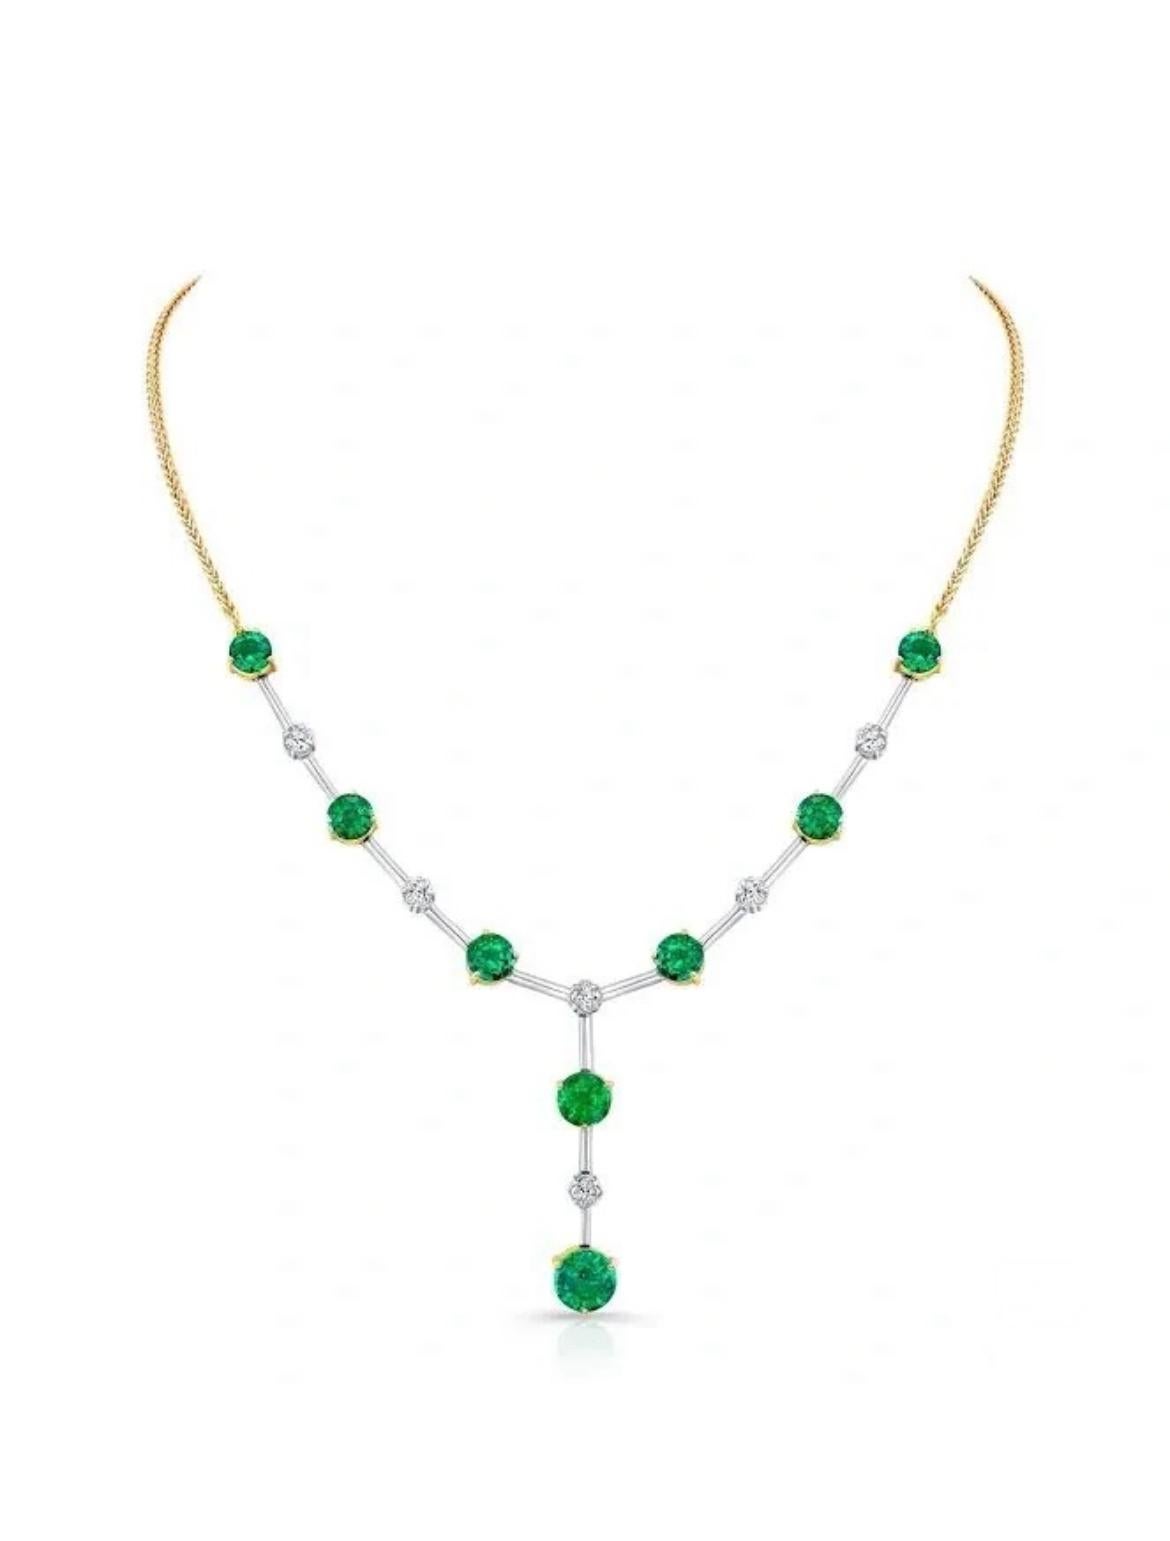 Round Cut 6.70ct round Emerald Necklace, featuring lily-cut diamonds in platinum. For Sale